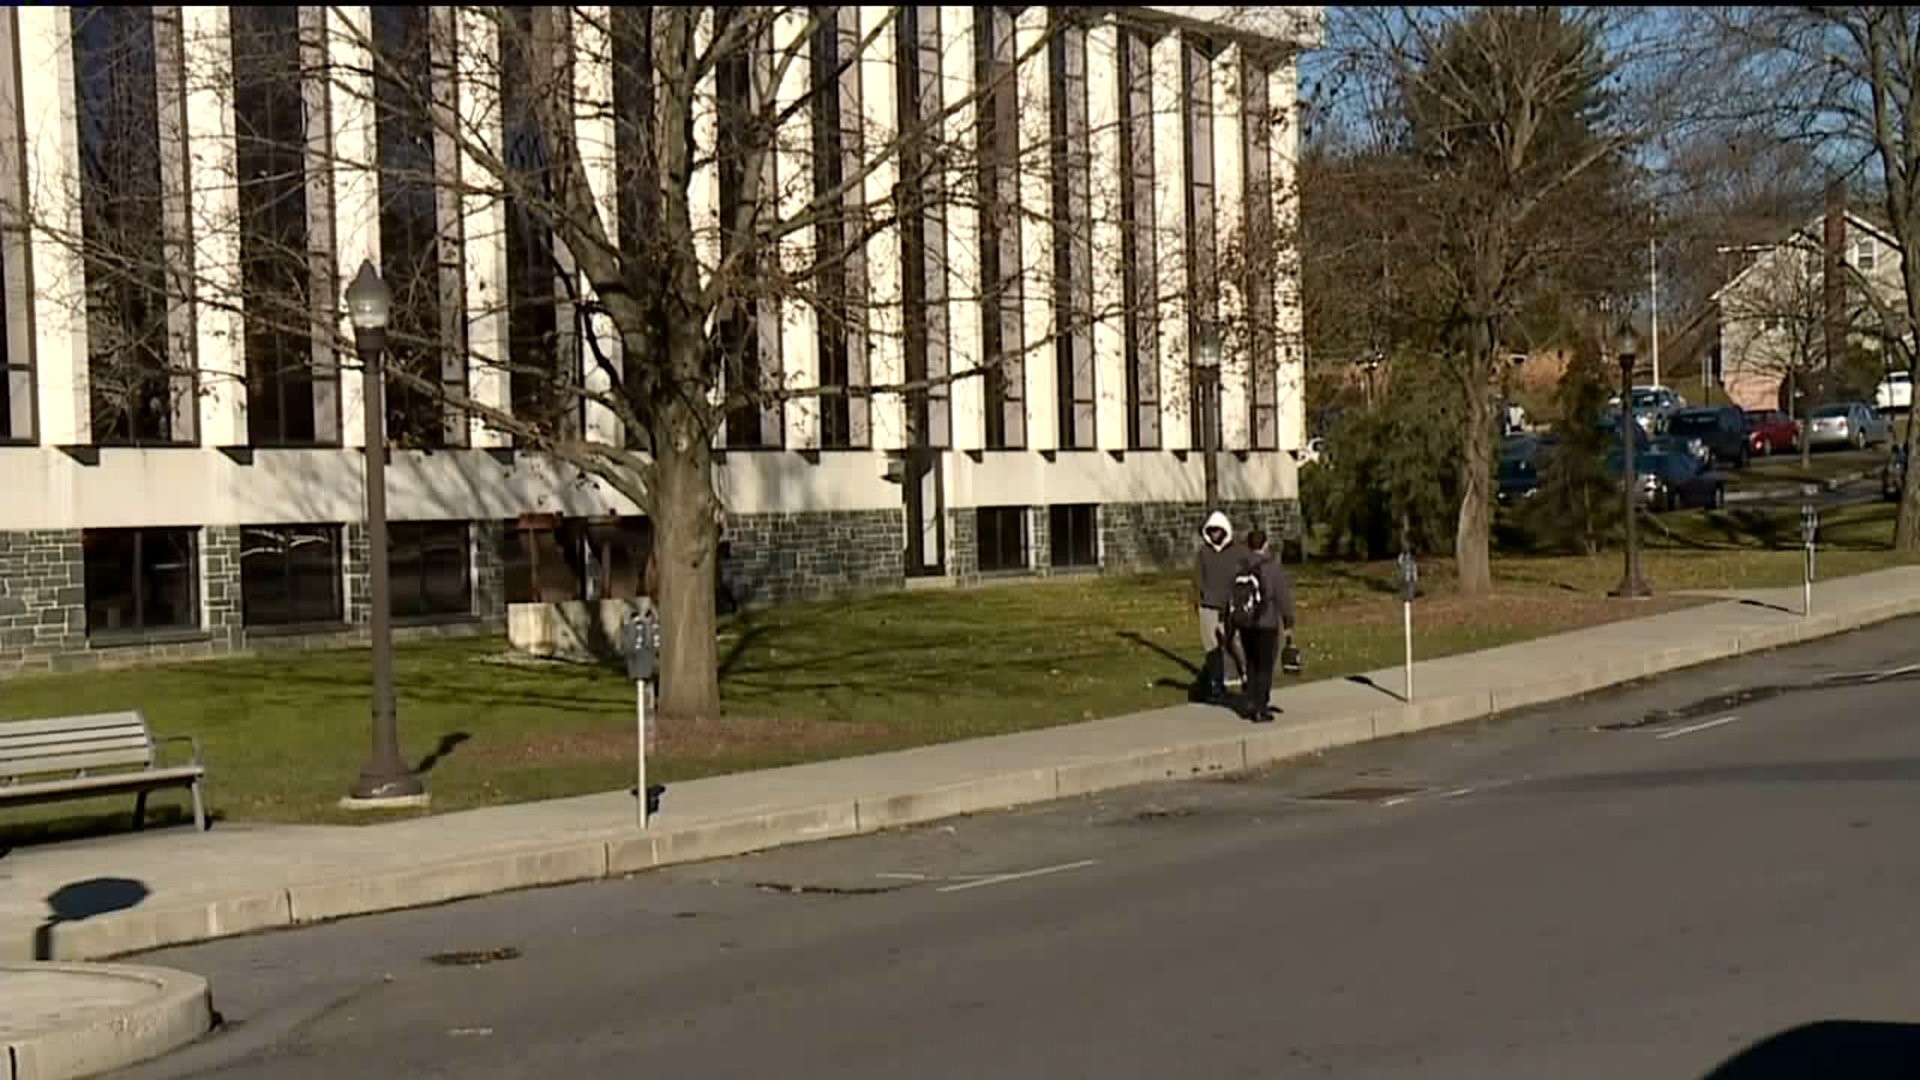 More Security on ESU Campus After Attempted Assault